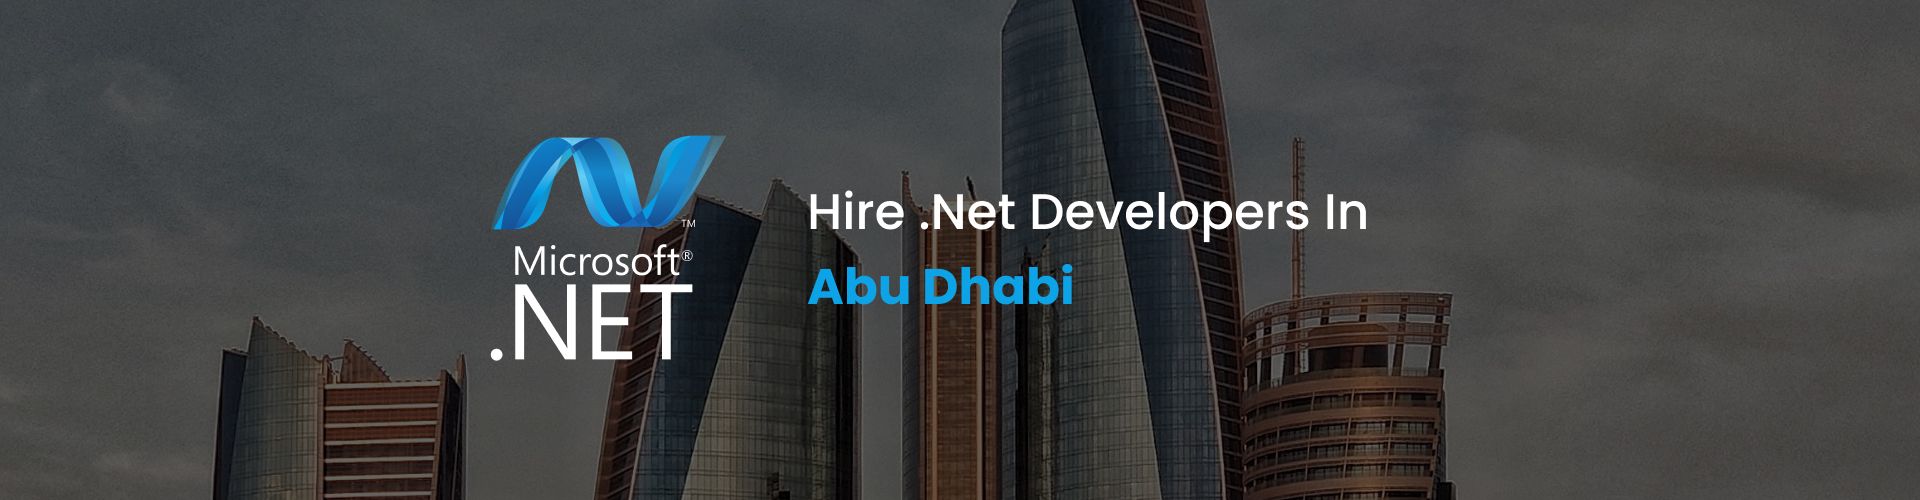 hire .net developers in abu dhabi